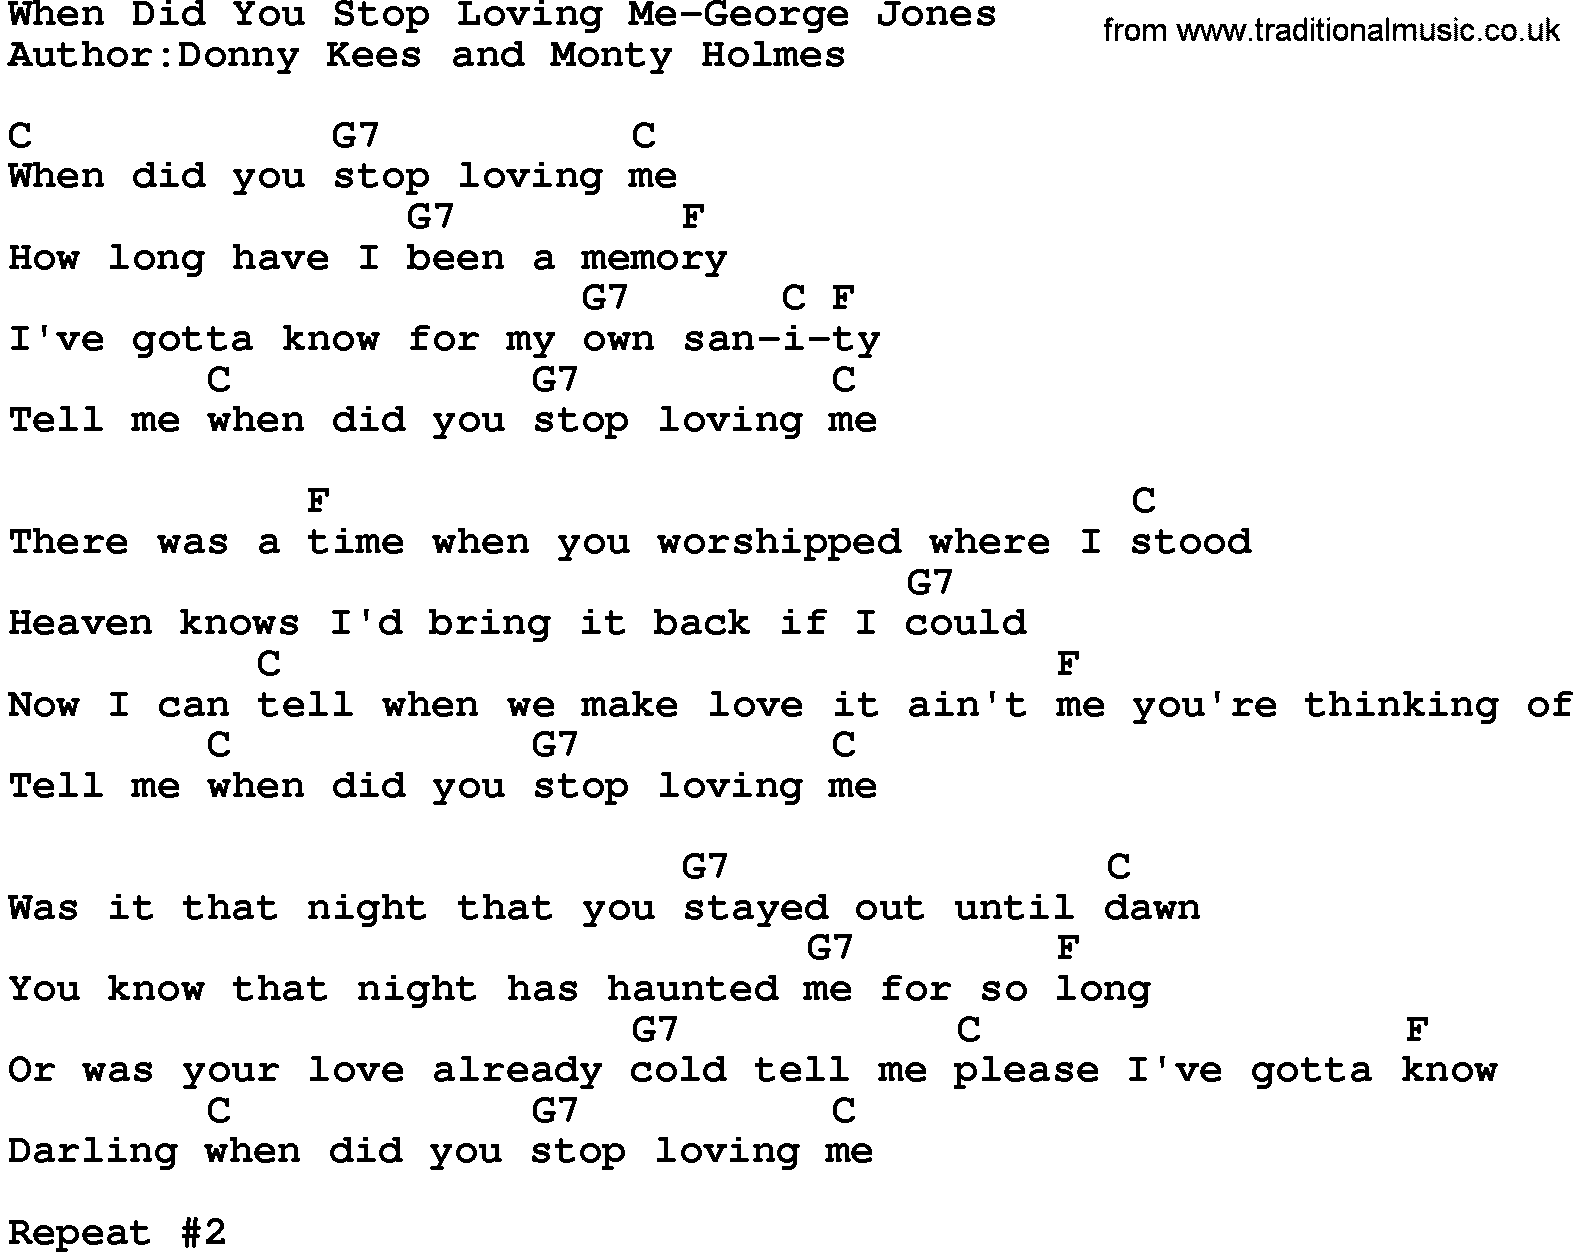 Country music song: When Did You Stop Loving Me-George Jones lyrics and chords